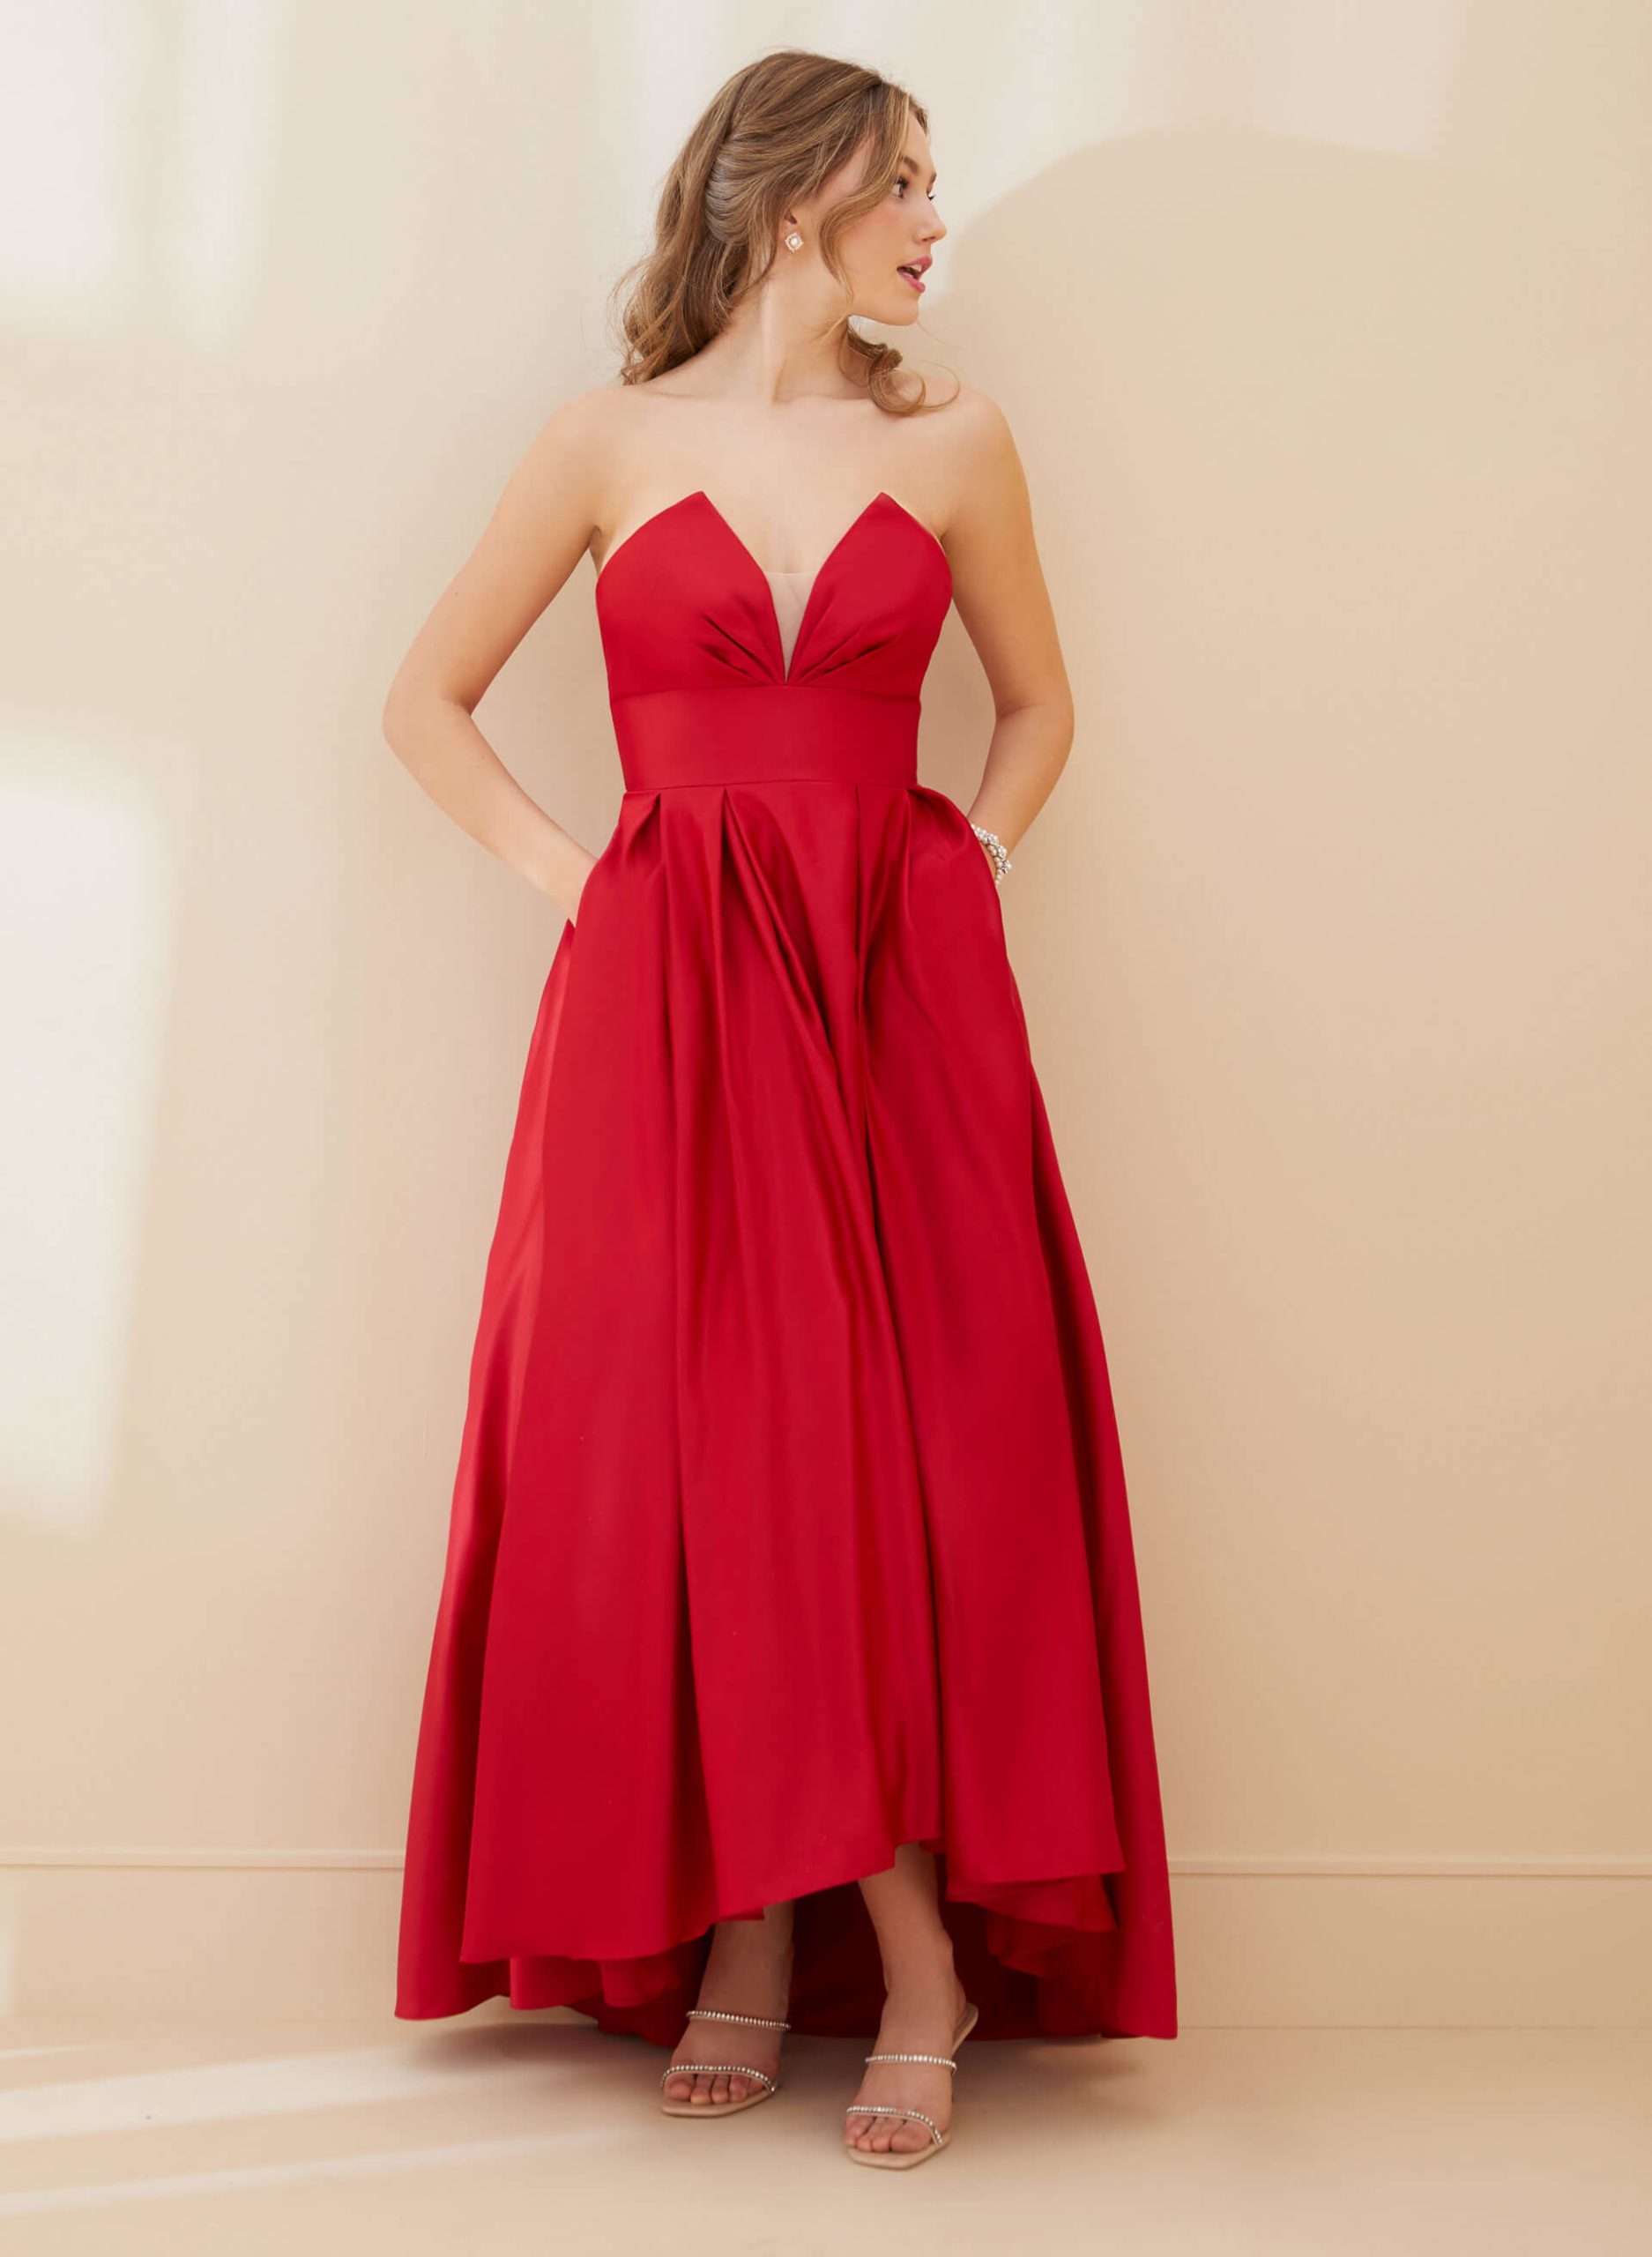 Meet the Stunning Prom Dresses of Your Dreams 